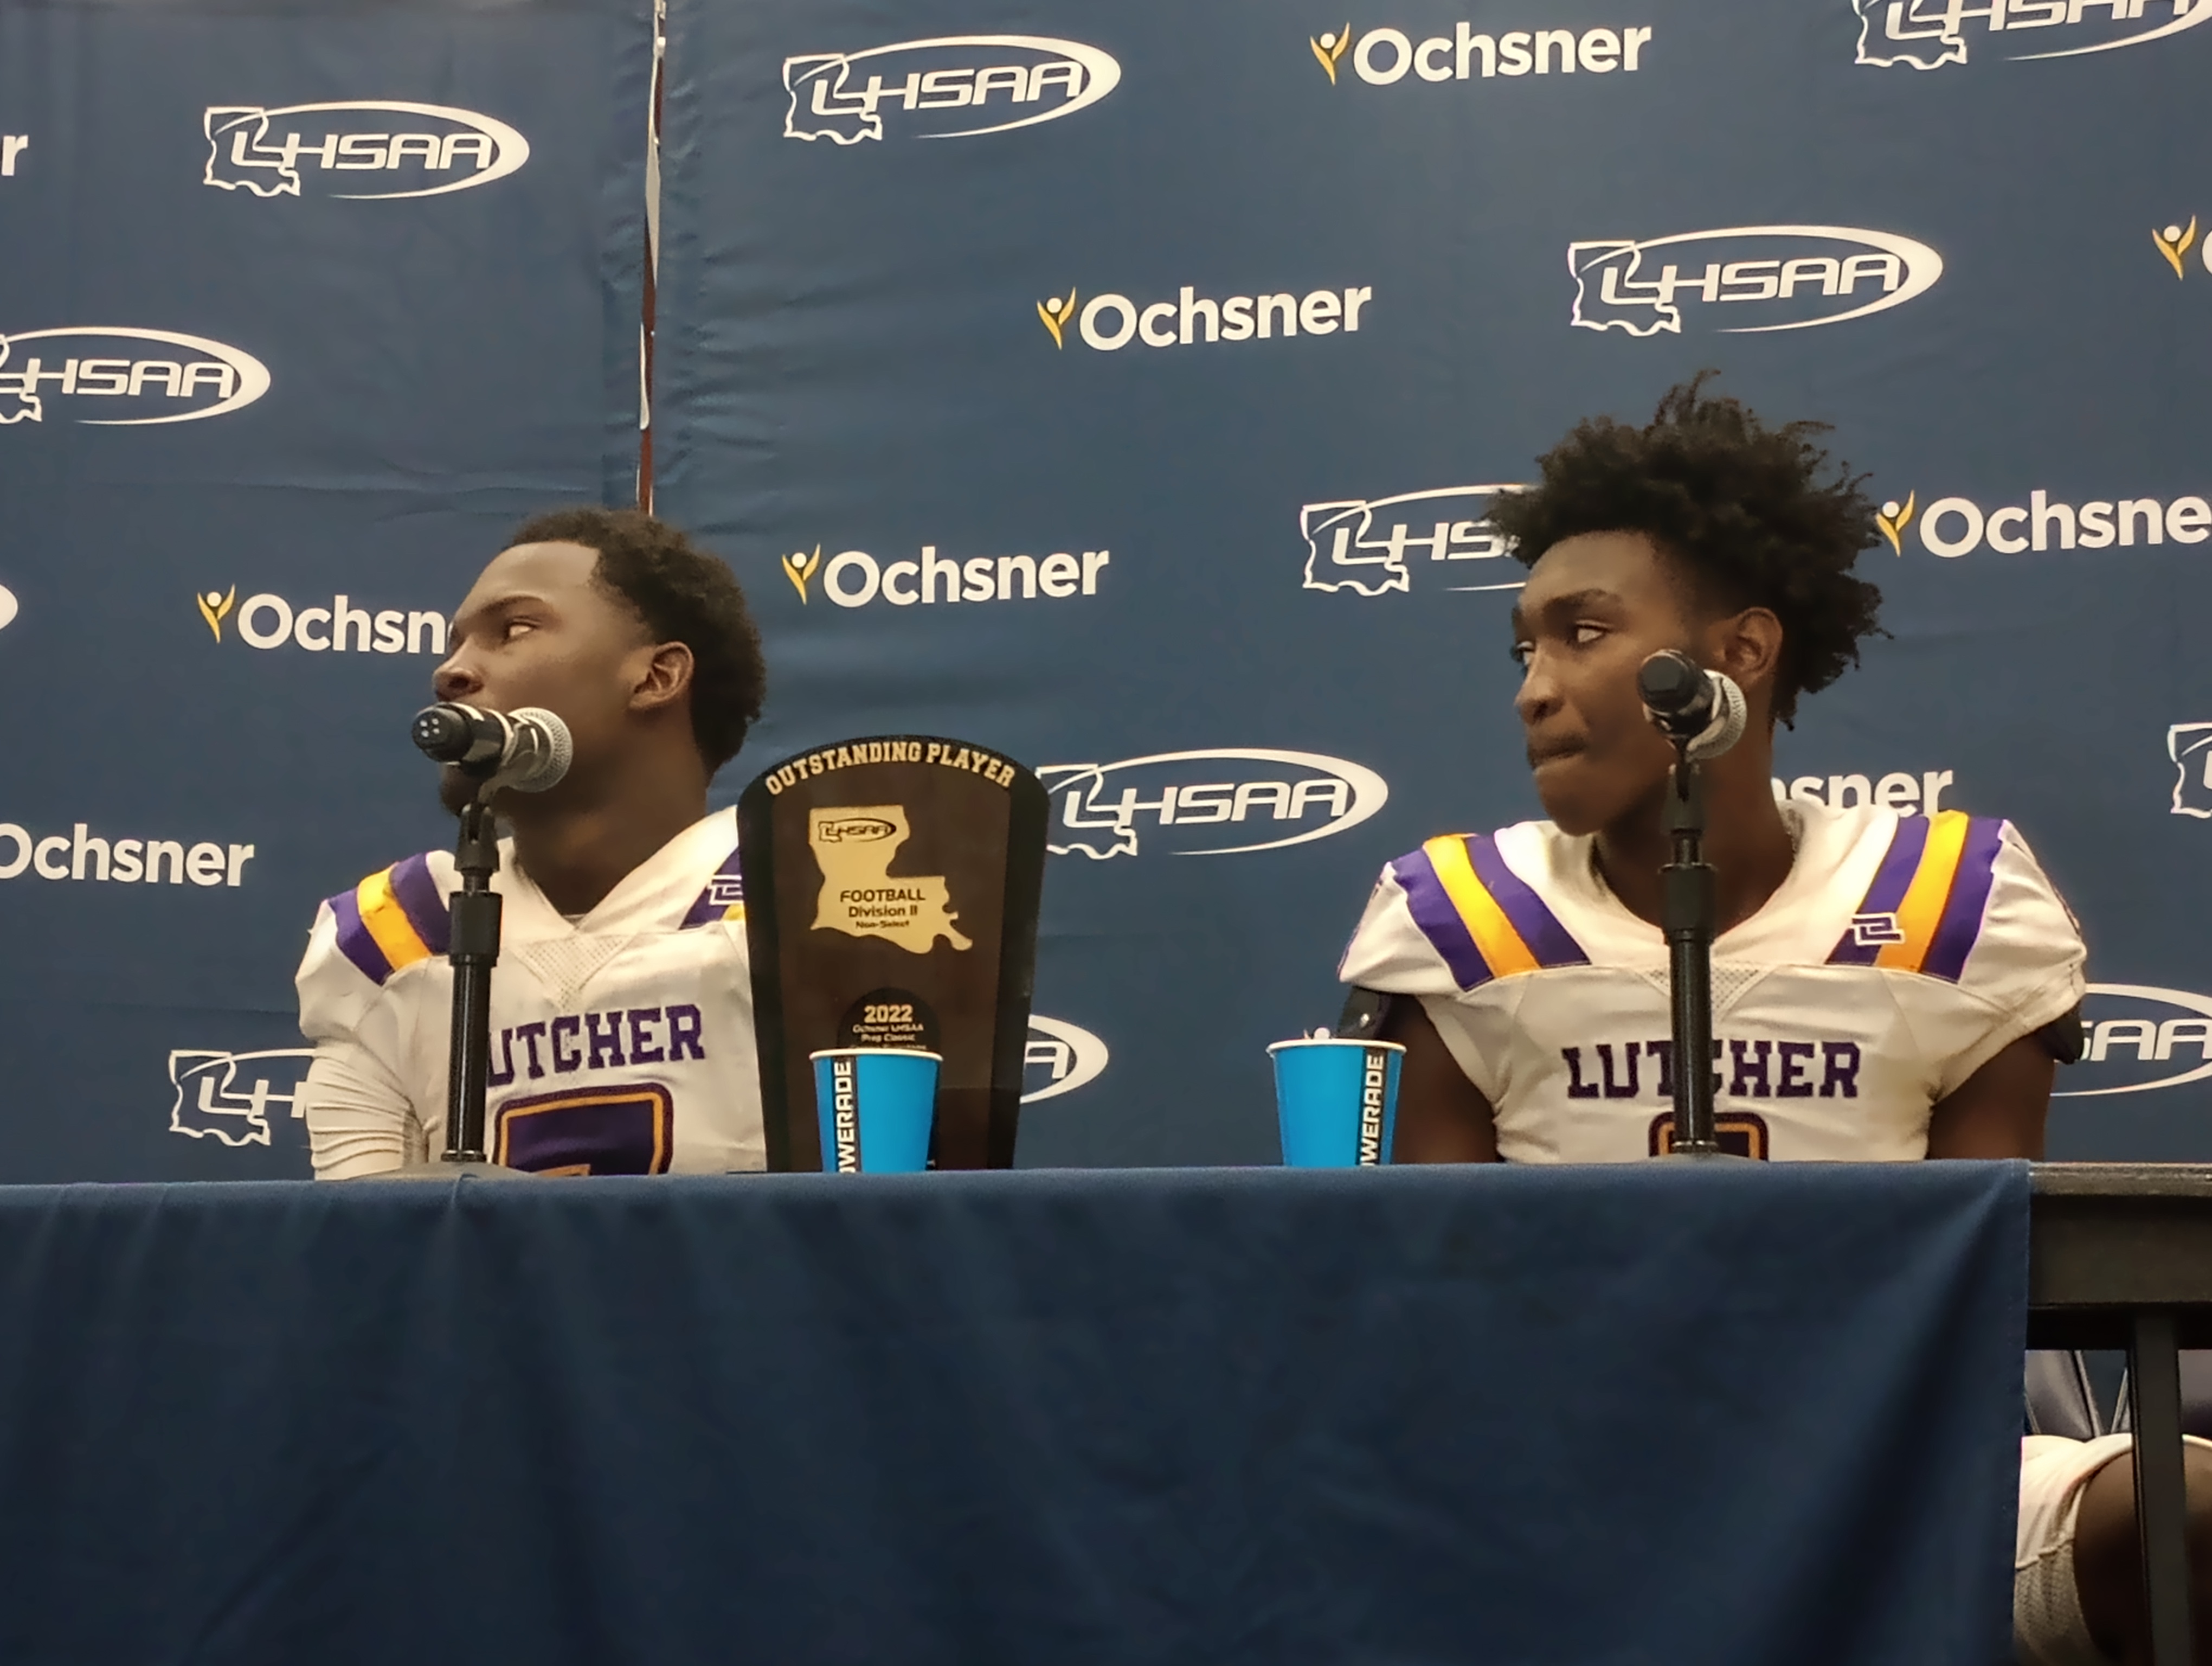 Lutcher QB D'Wanye' Winfield (left) and WR Tylin Johnson postgame after the Bulldogs' 28-25 win against North DeSoto for the Division II non-select championship on Dec. 10, 2022.